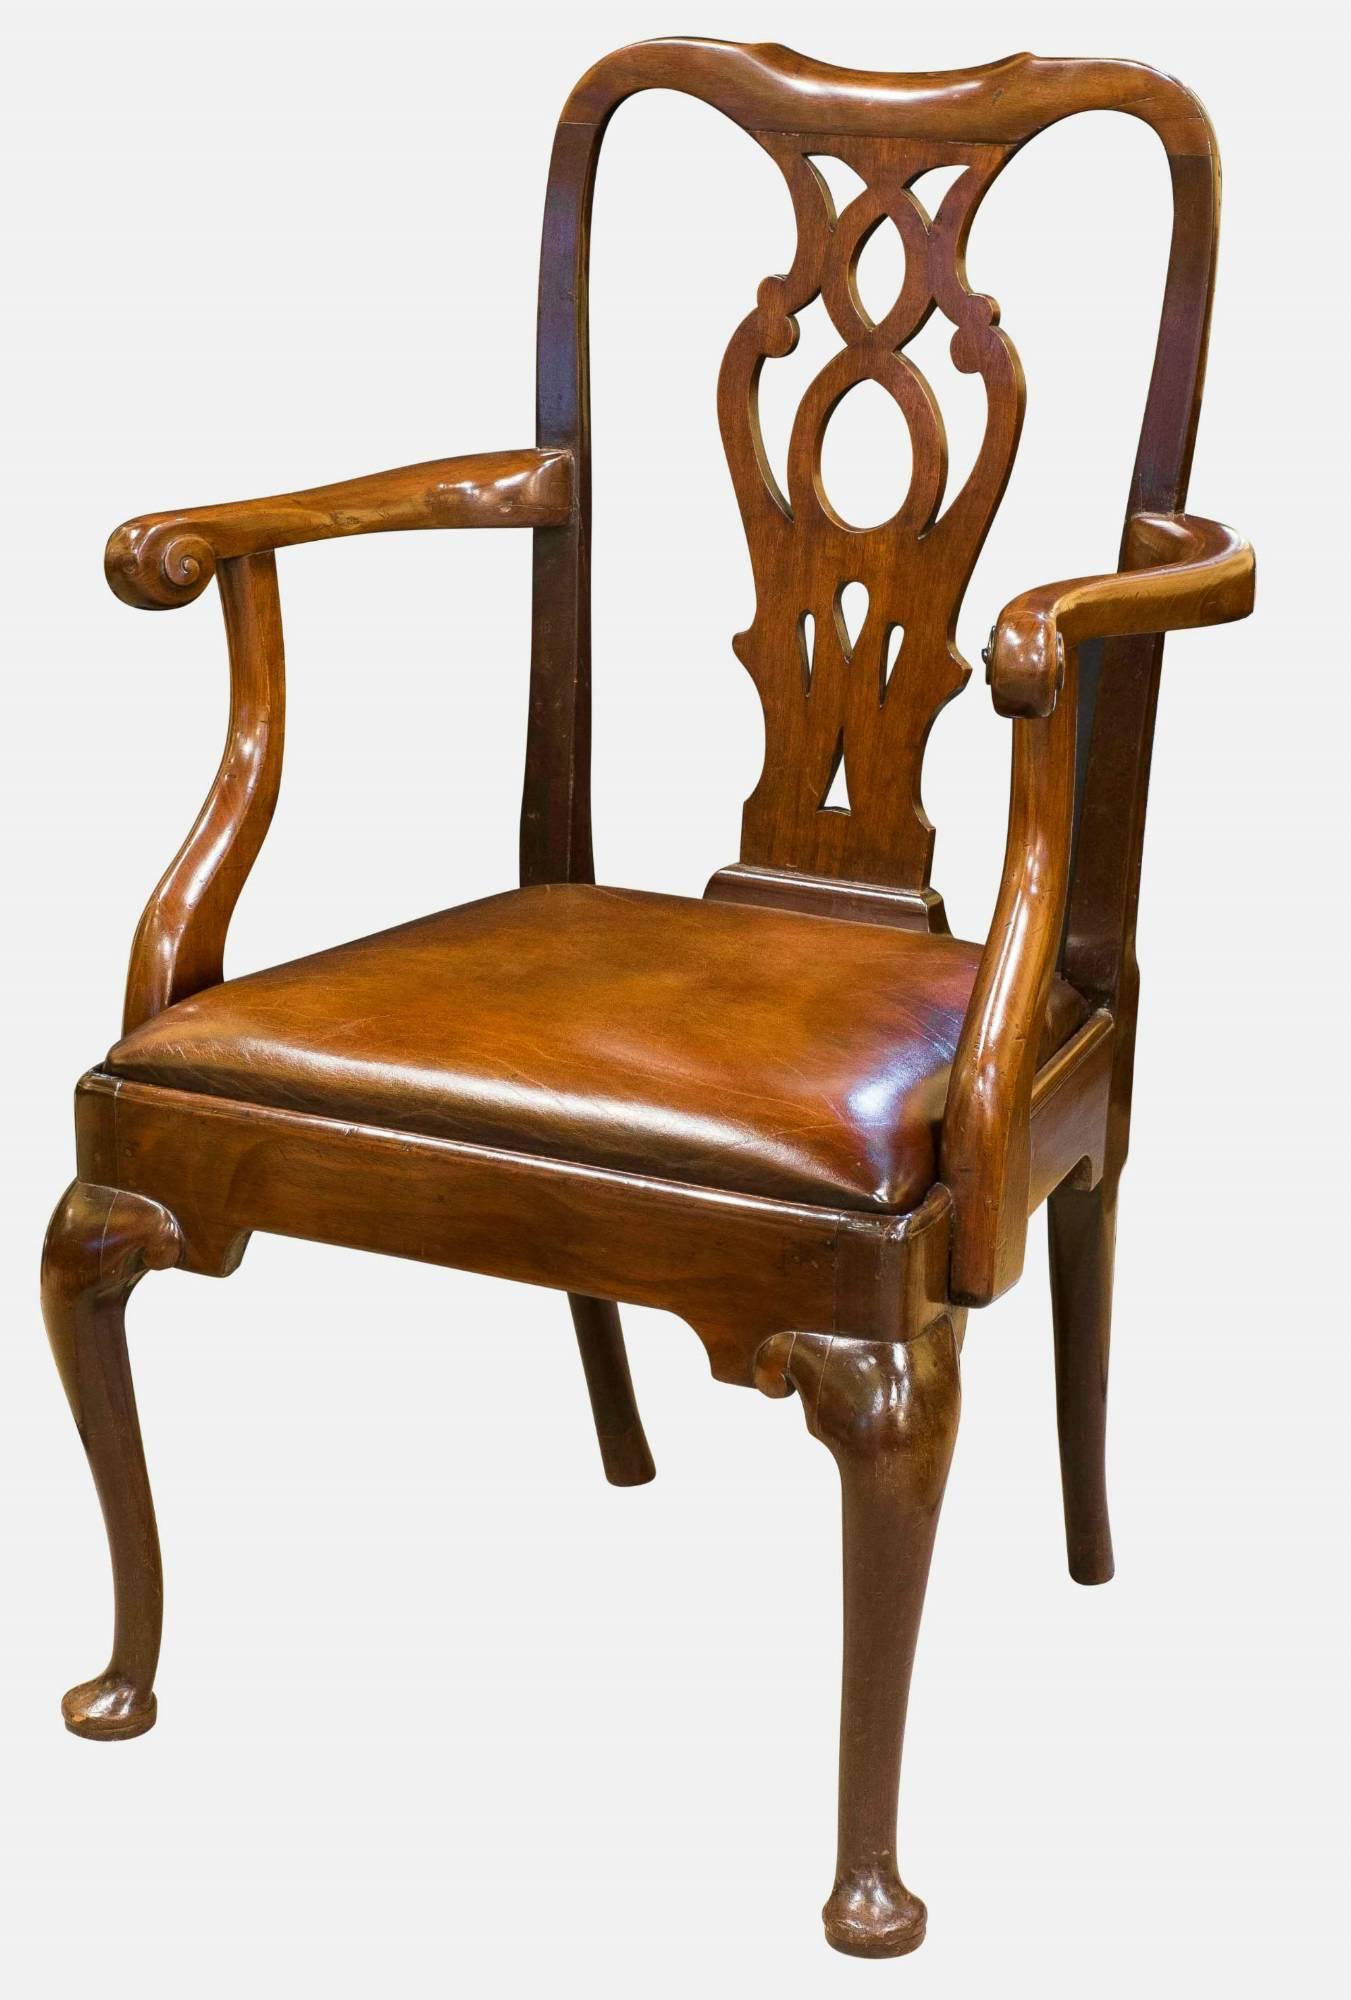 A mahogany elbow chair with hand dyed drop-in seat
Measure: Seat height 49cm
circa 1730.